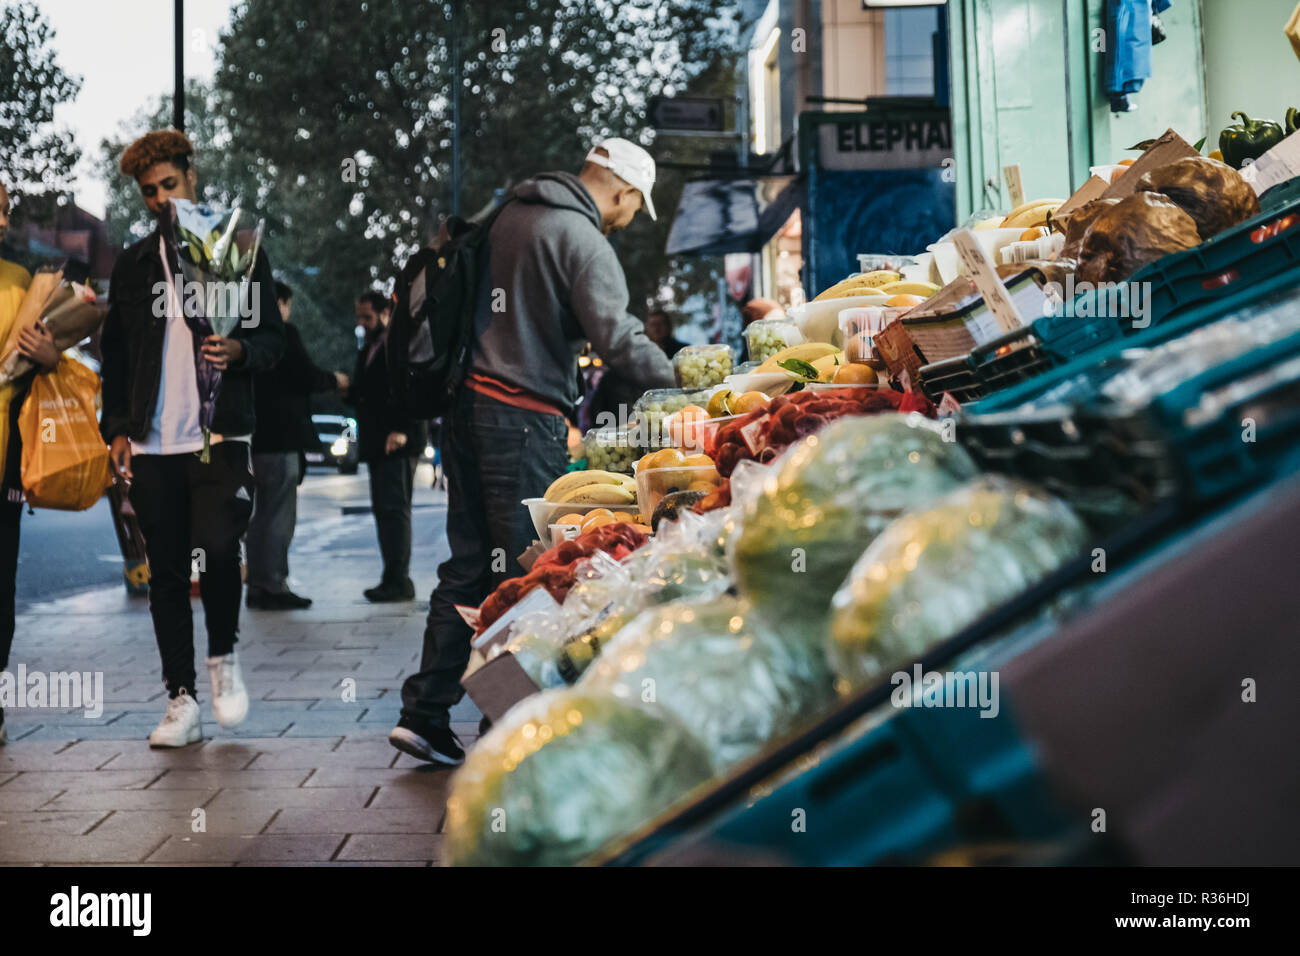 London, UK - November 02, 2018: Fresh fruits and vegetables on sale at a convenience store in London, UK. These stores are located throughout the city Stock Photo